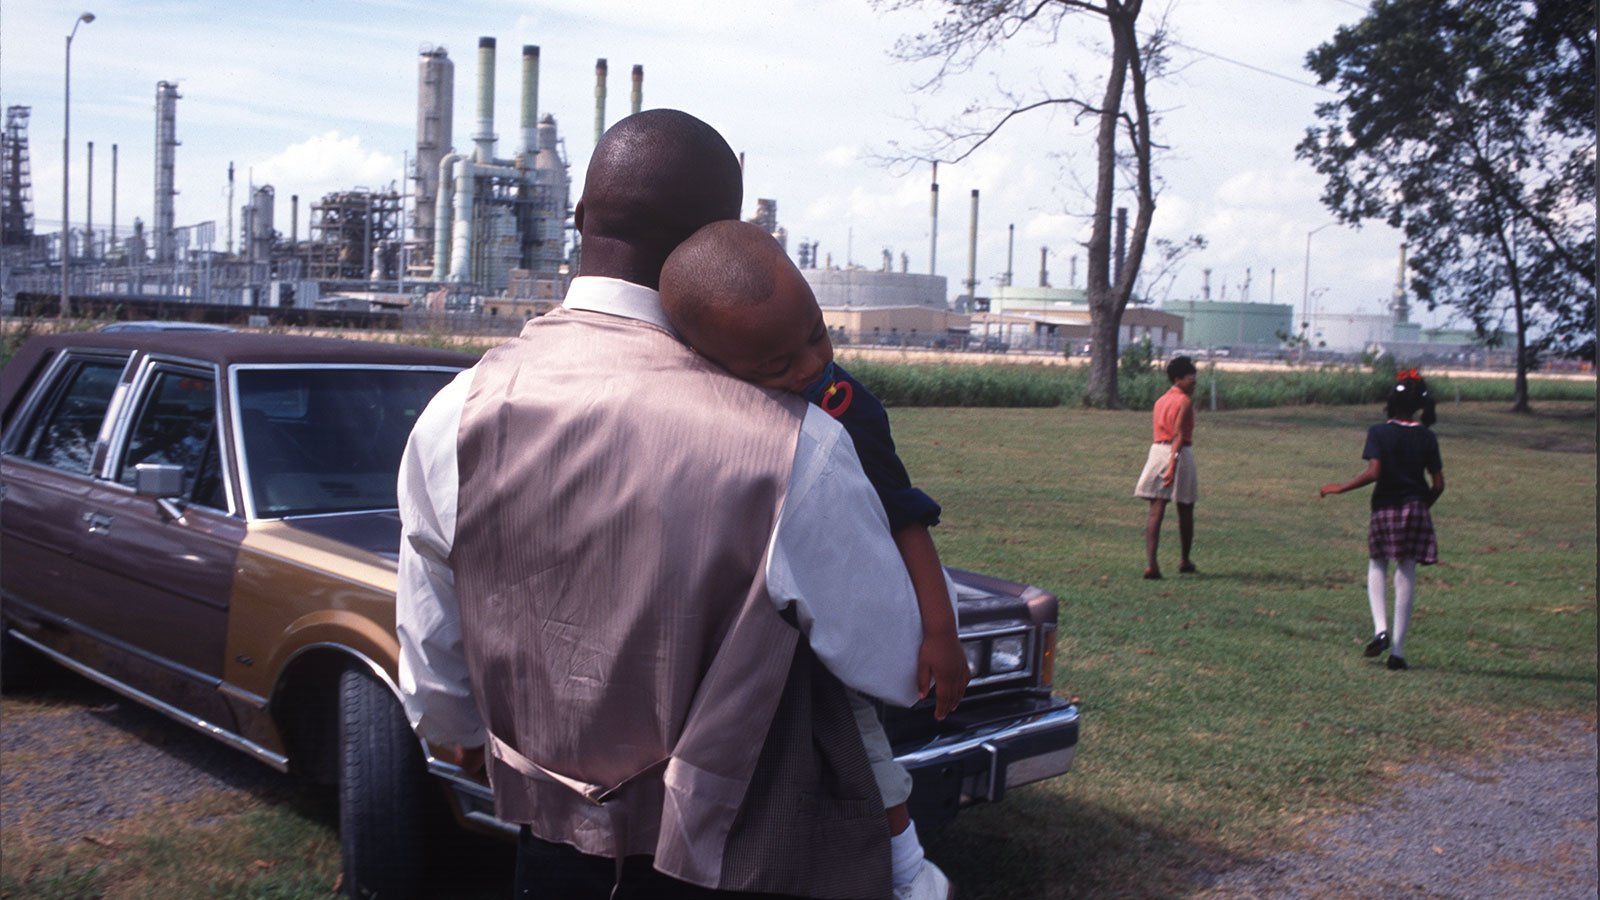 A family leaves Sunday church services surrounded by chemical plants in October of 1998 in Lions, Louisiana.